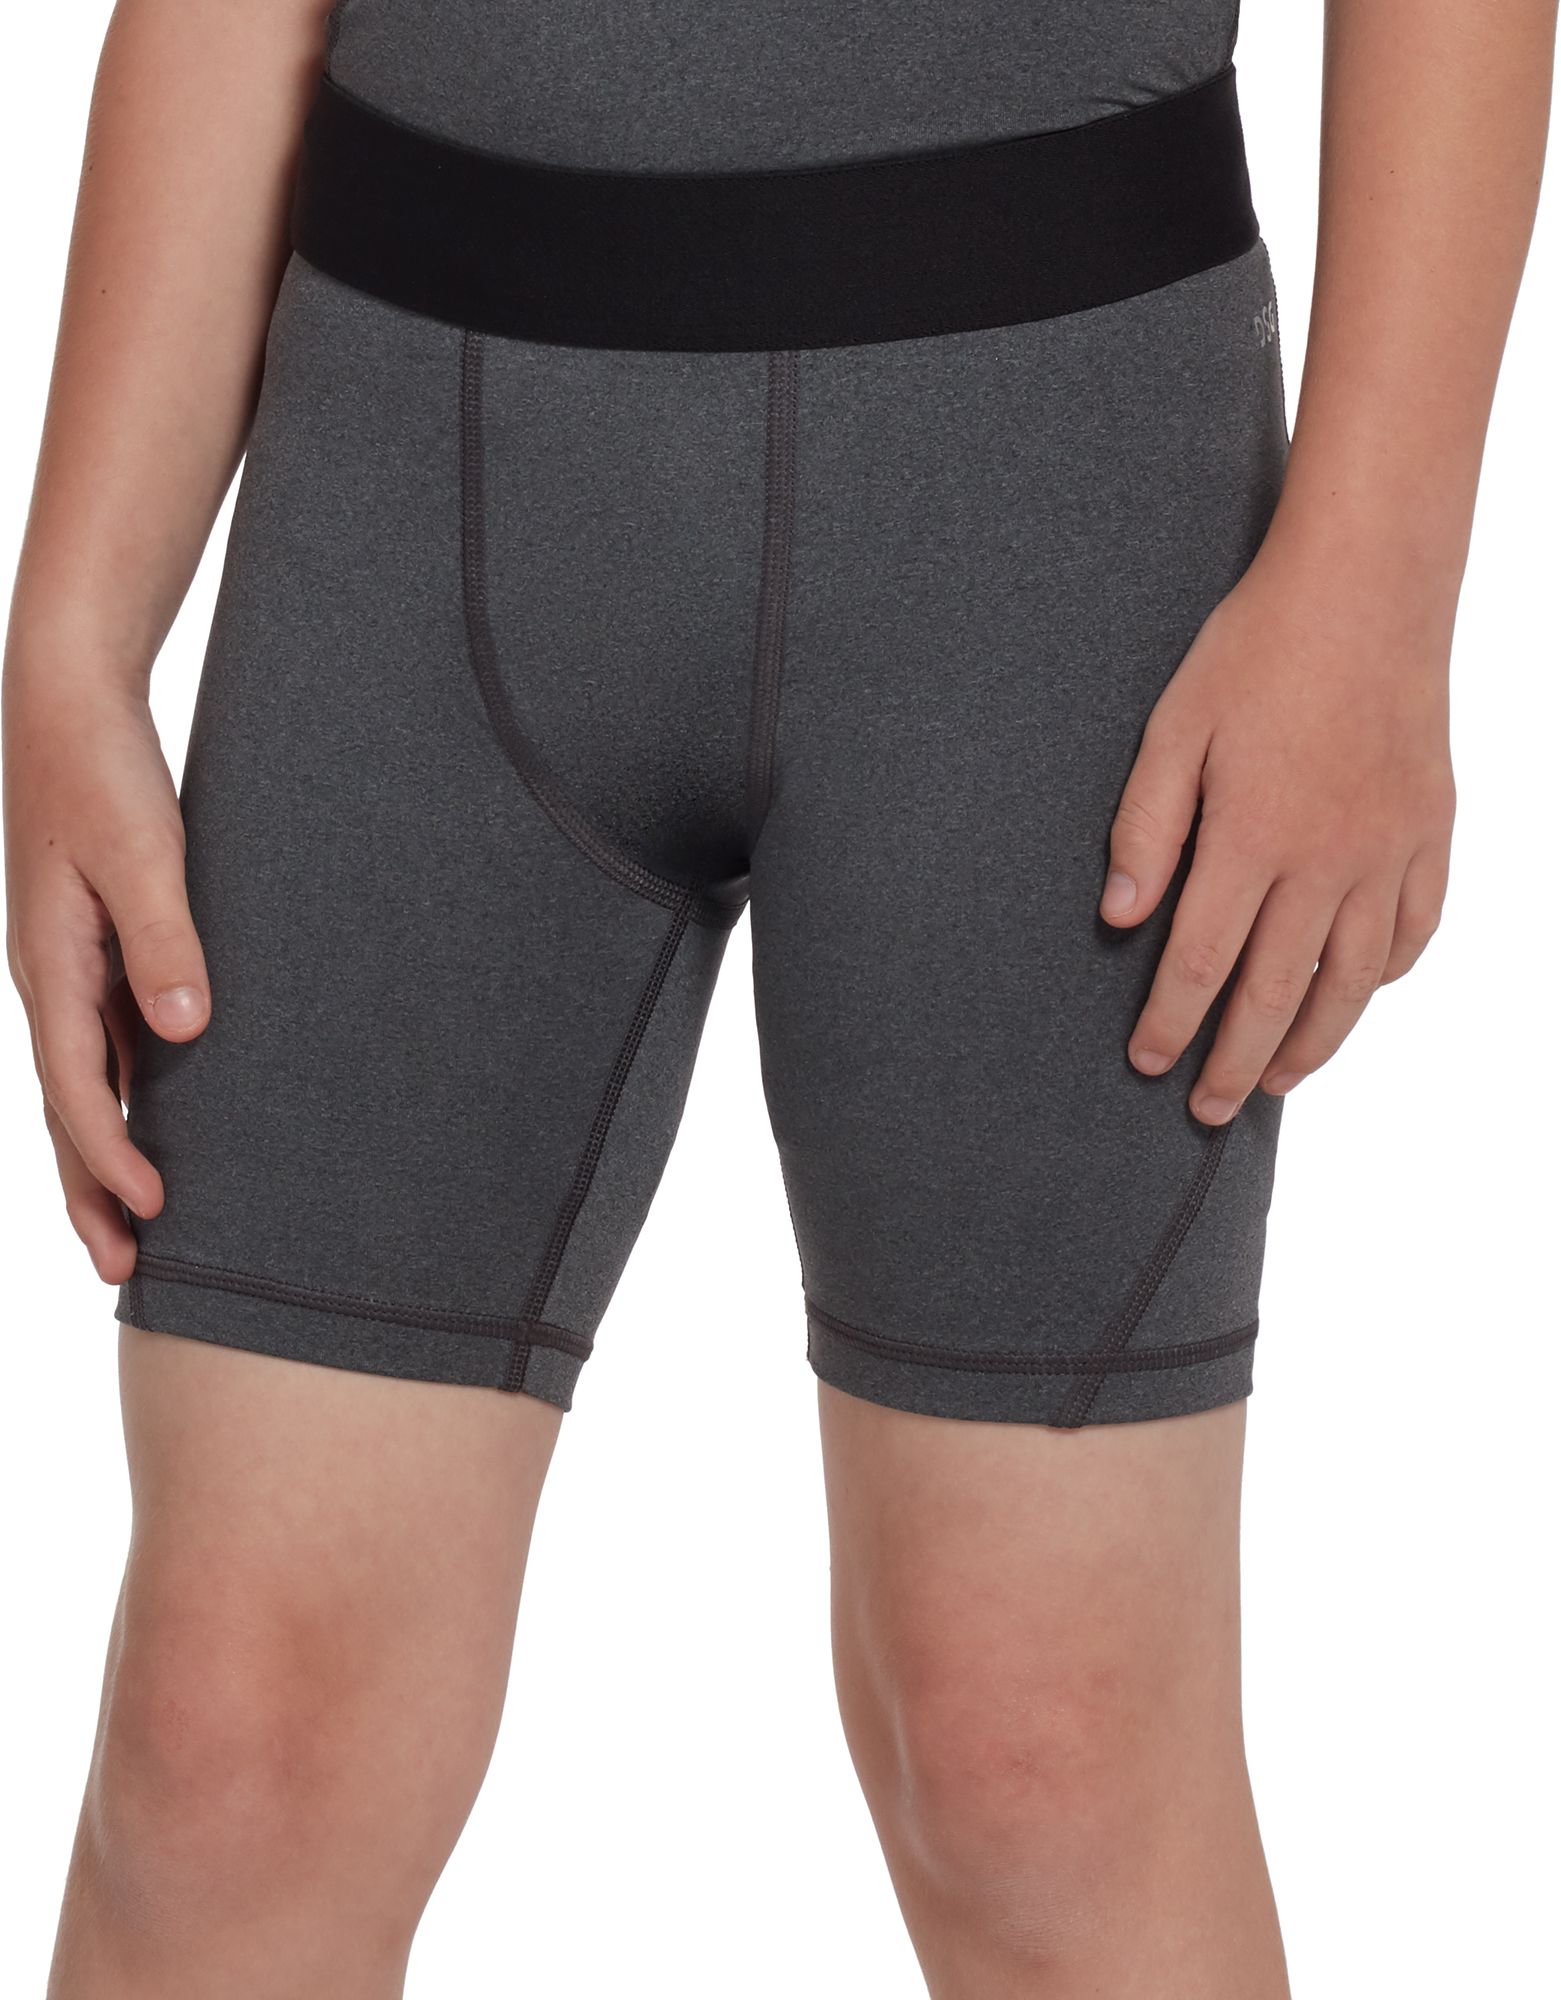 youth basketball compression shorts